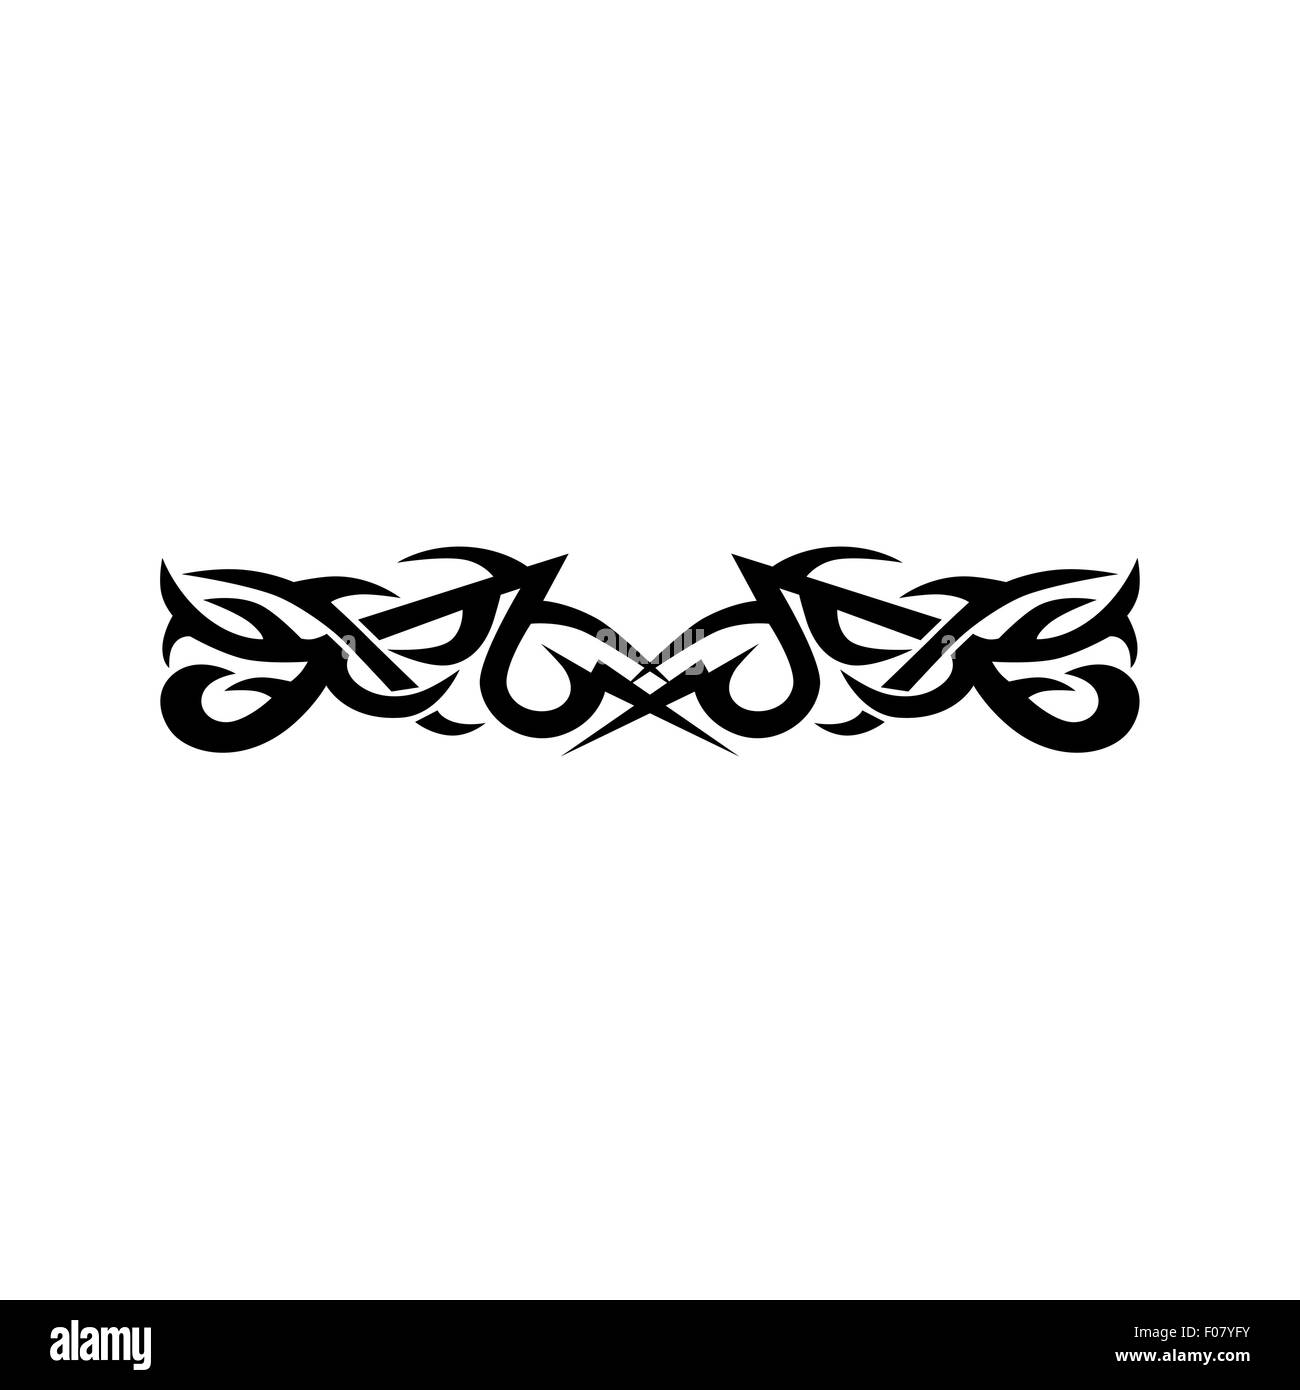 Clipart Black And White Borders Or Band Tattoo Designs  Royalty Free  Vector Illustration by Arena Creative 1115023